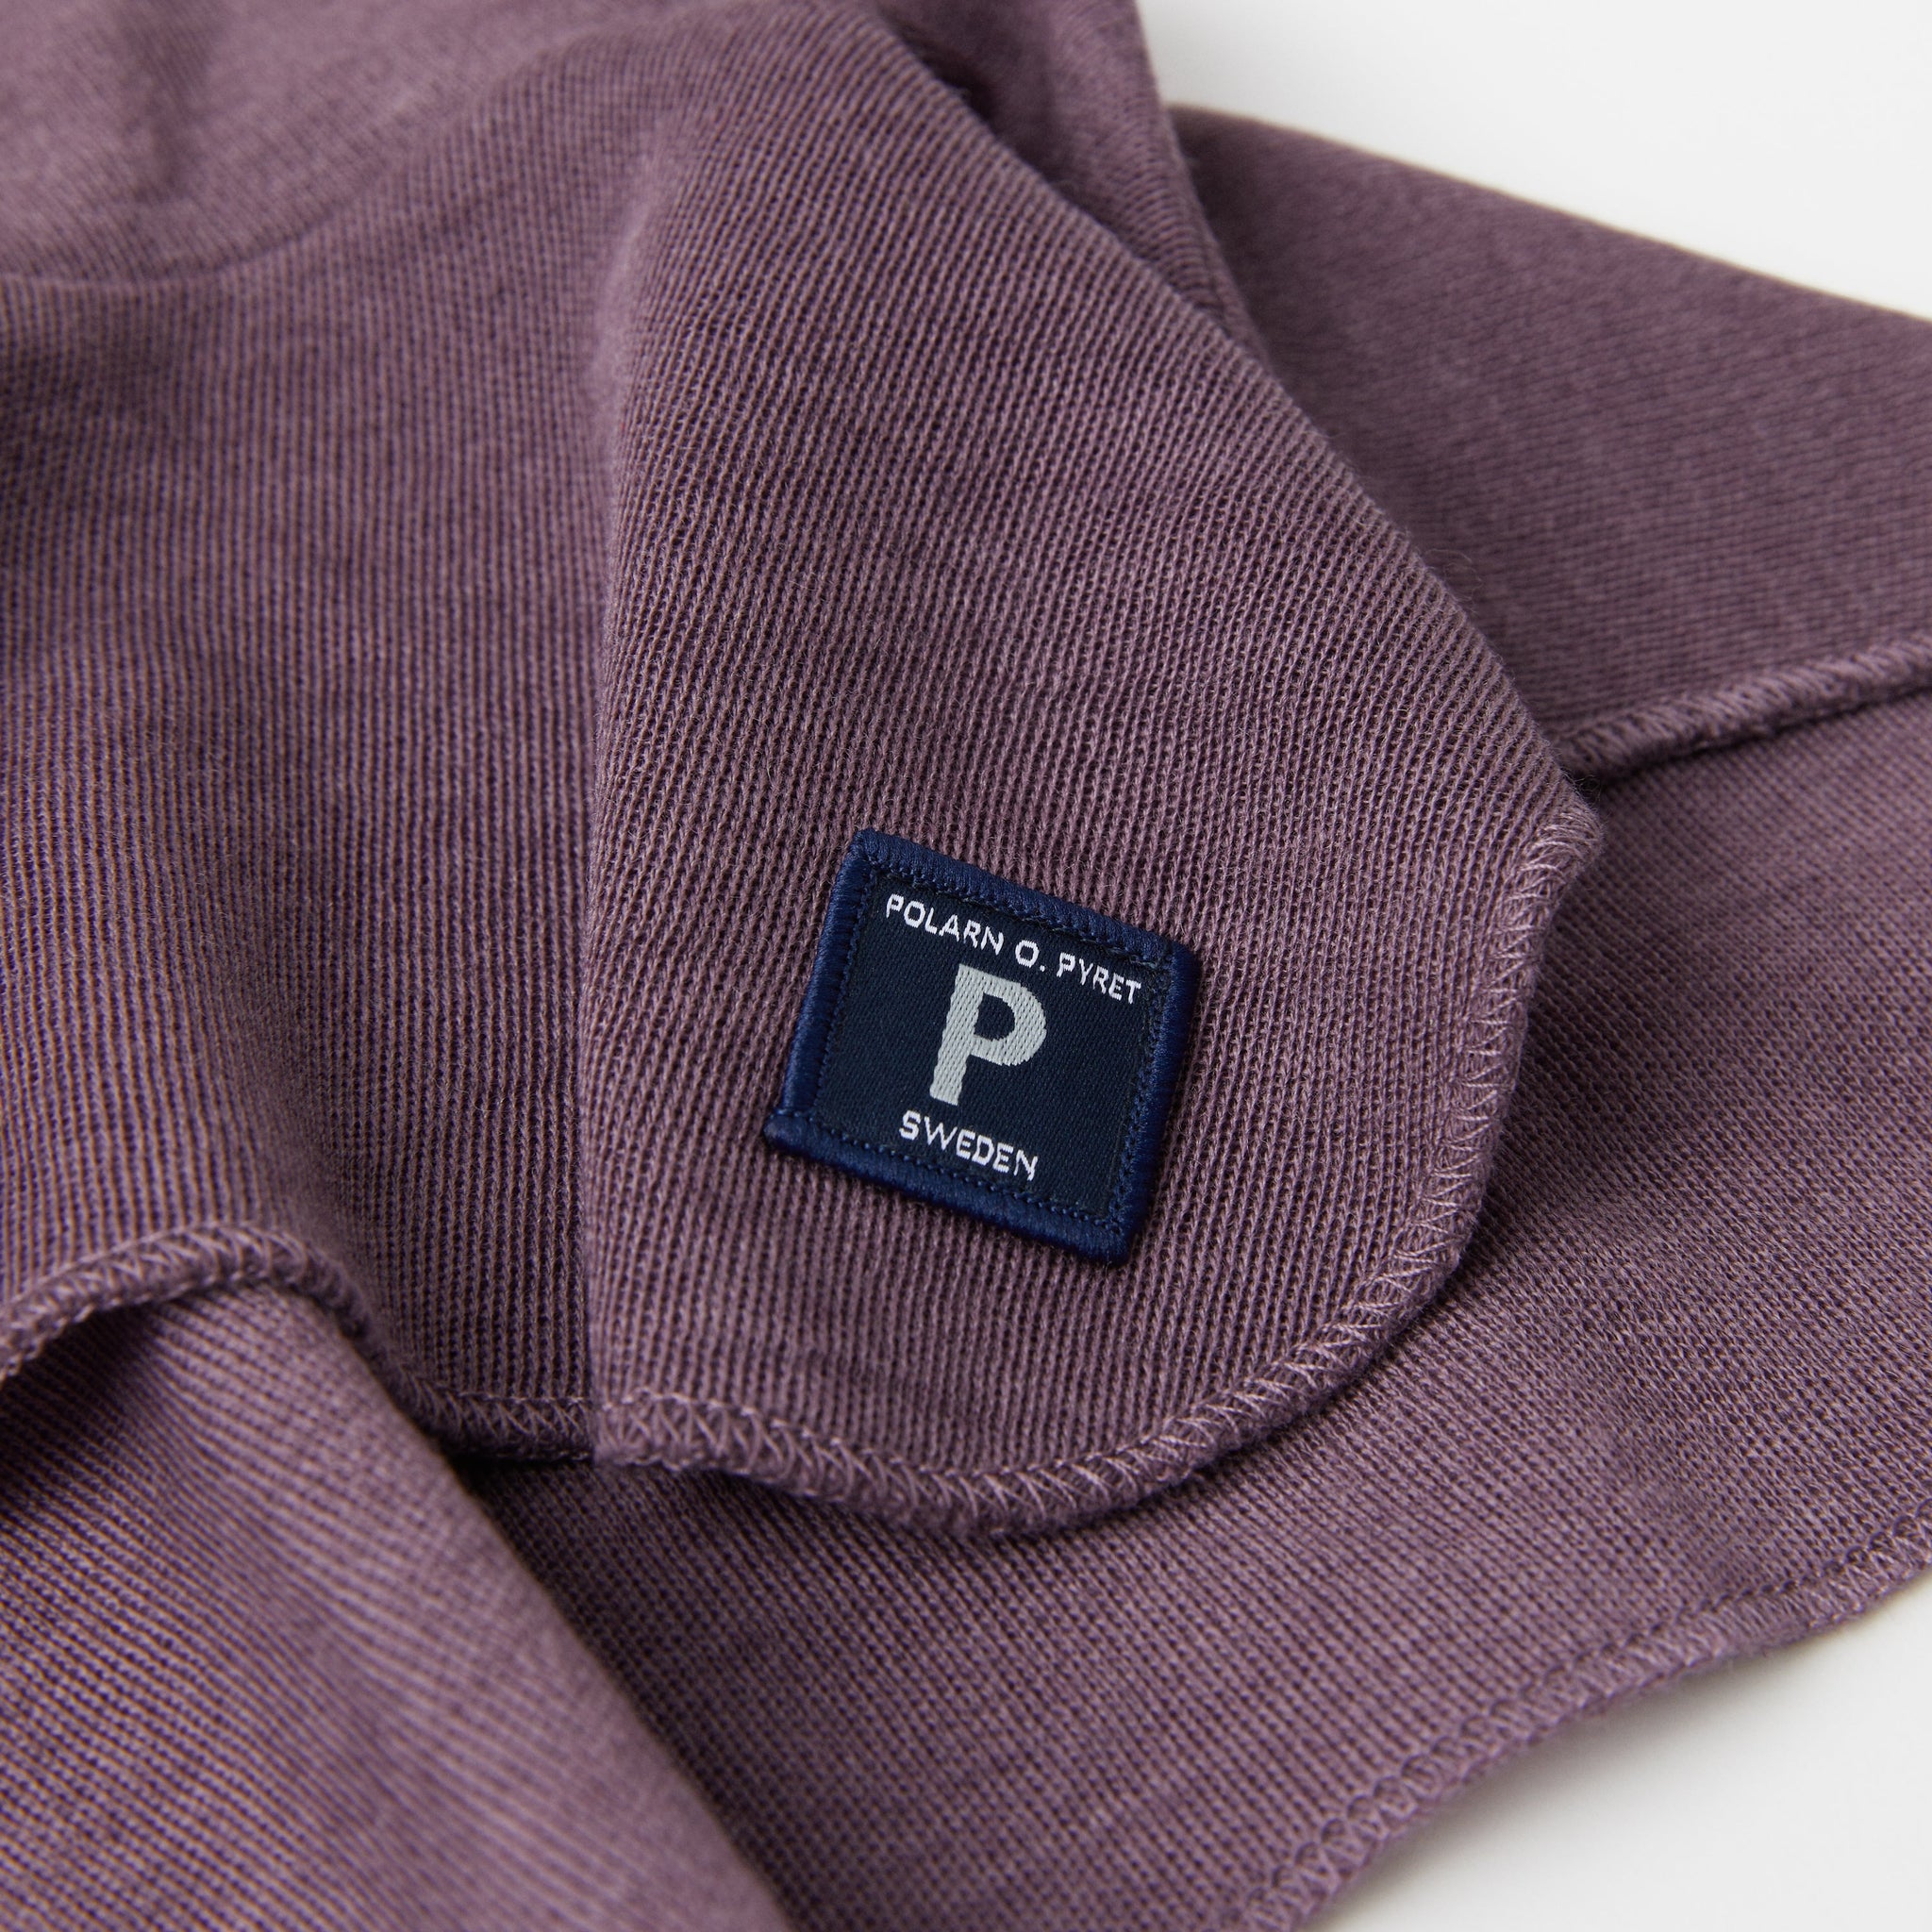 Merino Wool Purple Kids Snood from the Polarn O. Pyret kidswear collection. Ethically produced outerwear.